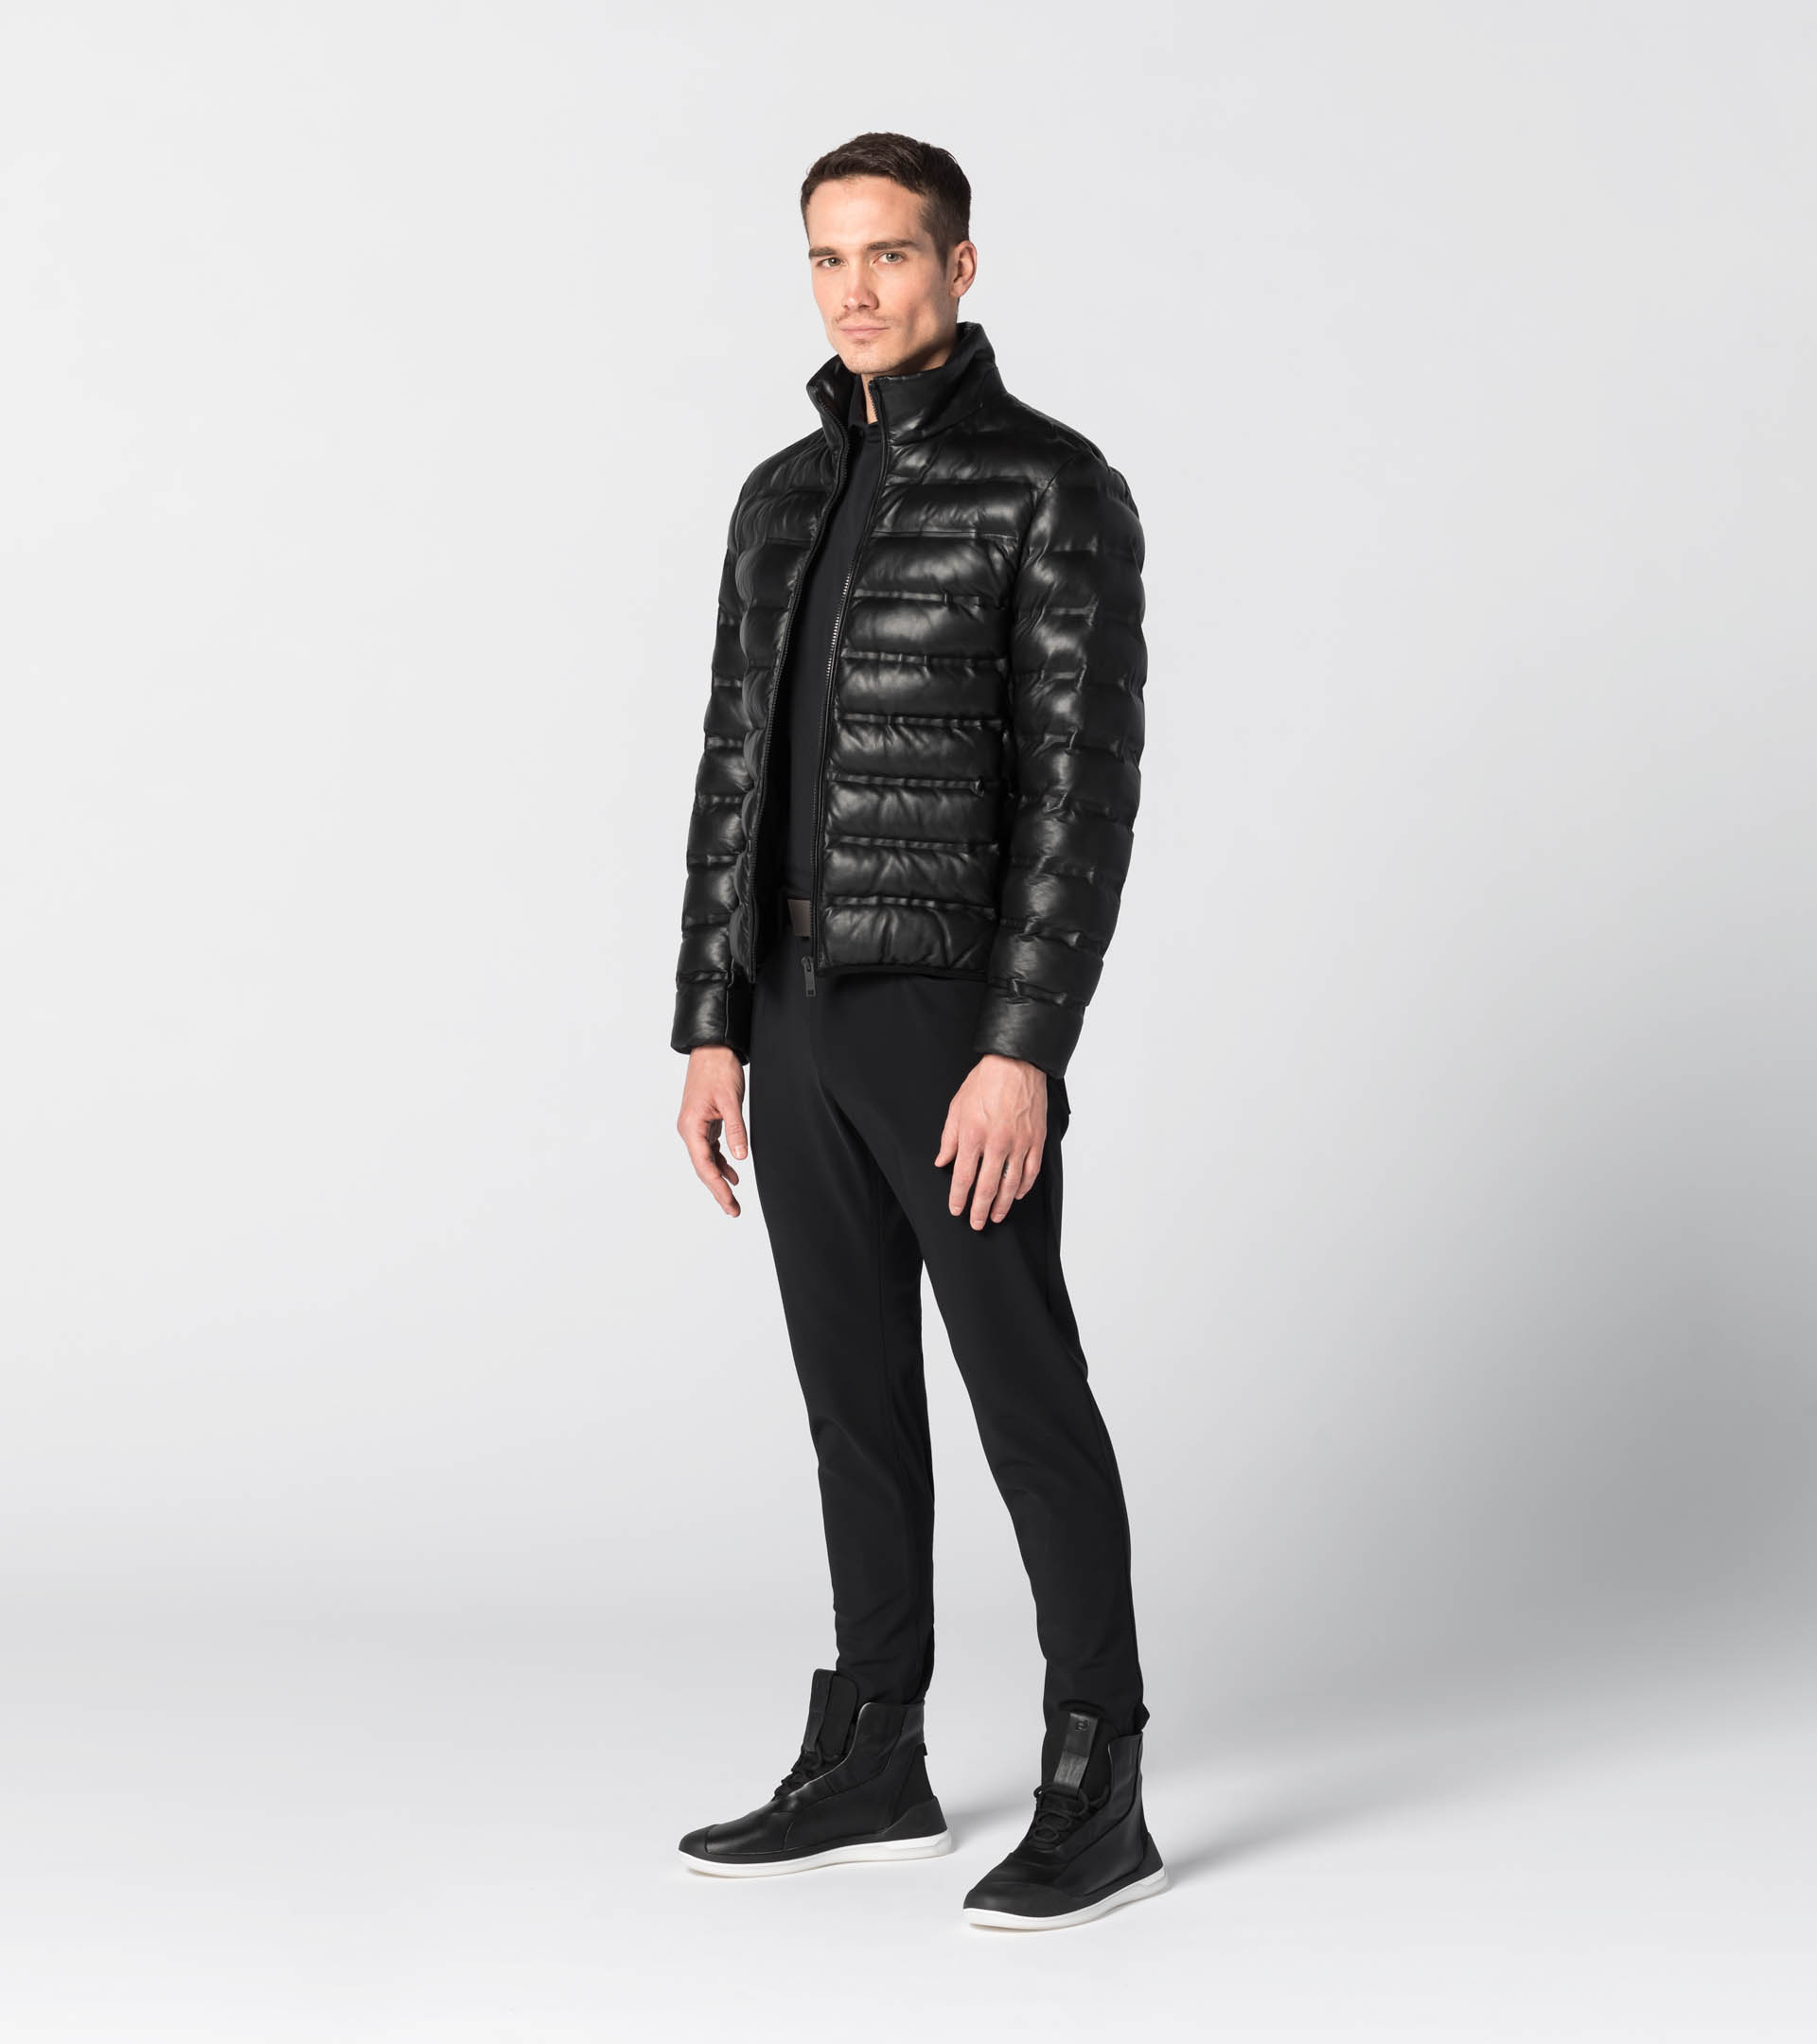 Lightweight Leather Jacket - Exclusive Leather Jackets for Men ...